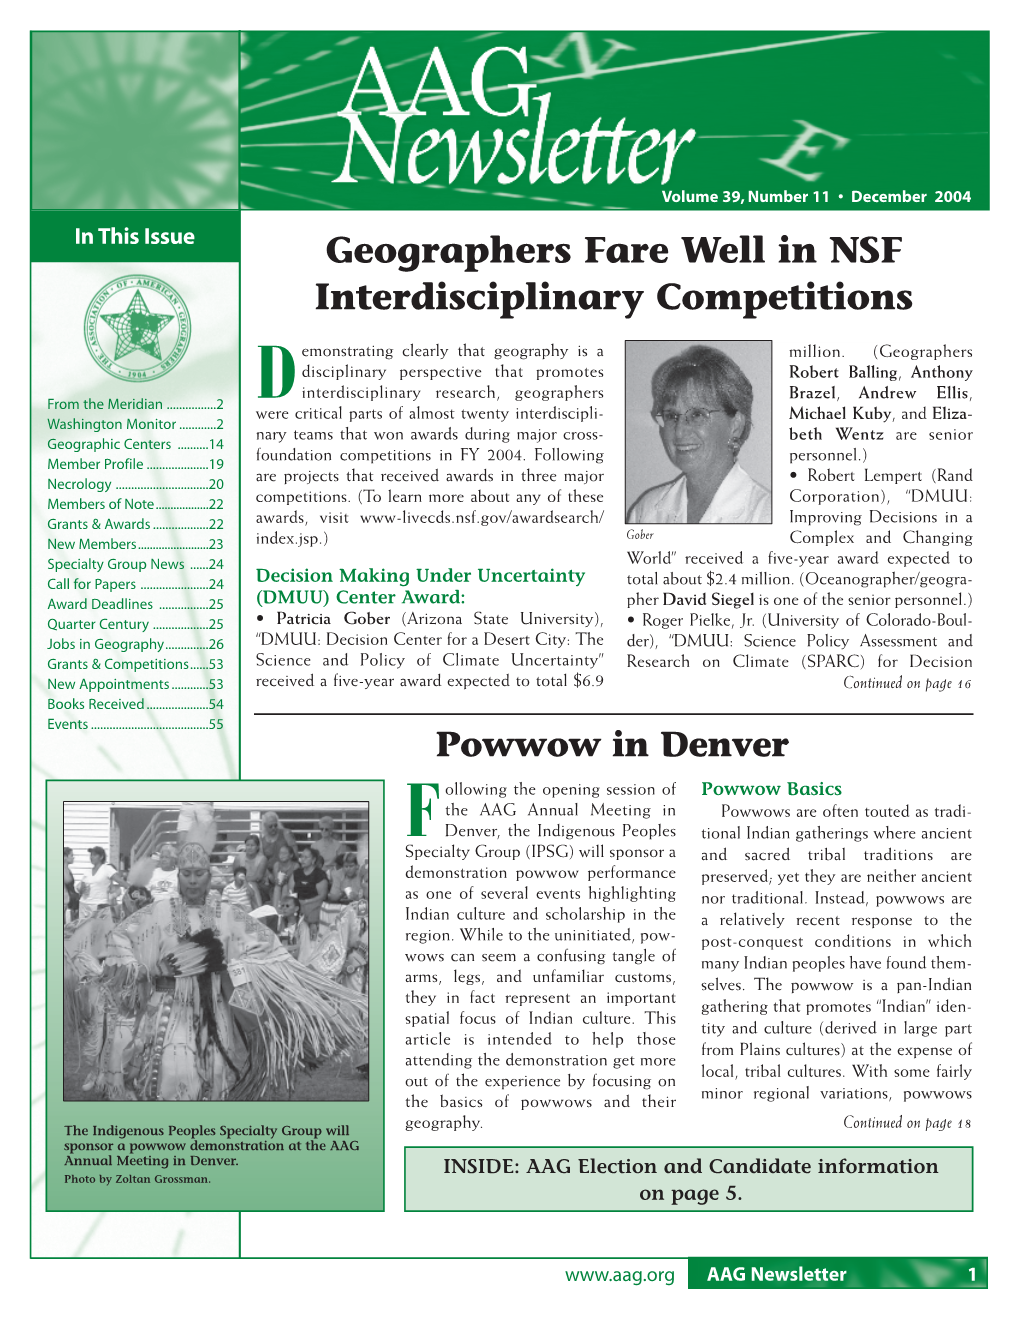 Geographers Fare Well in NSF Interdisciplinary Competitions